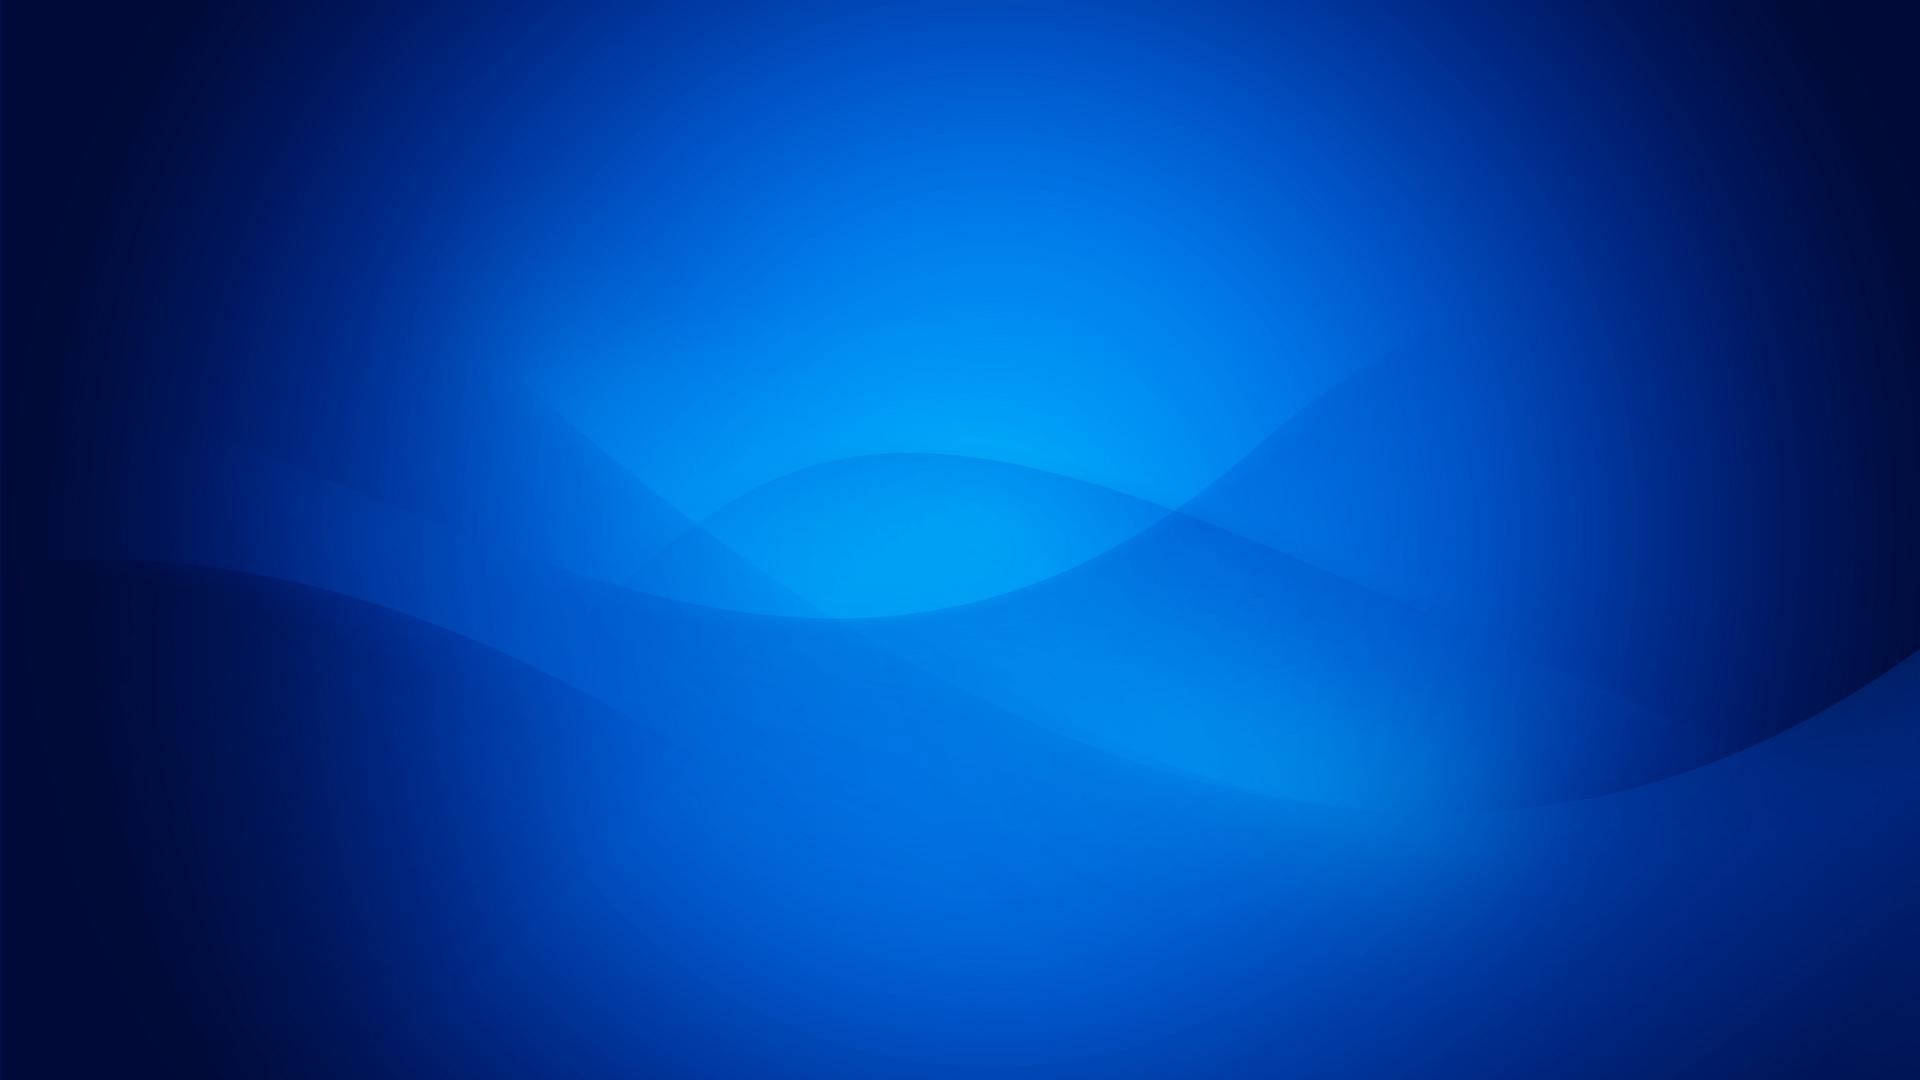 Cool Blue Blurry Background